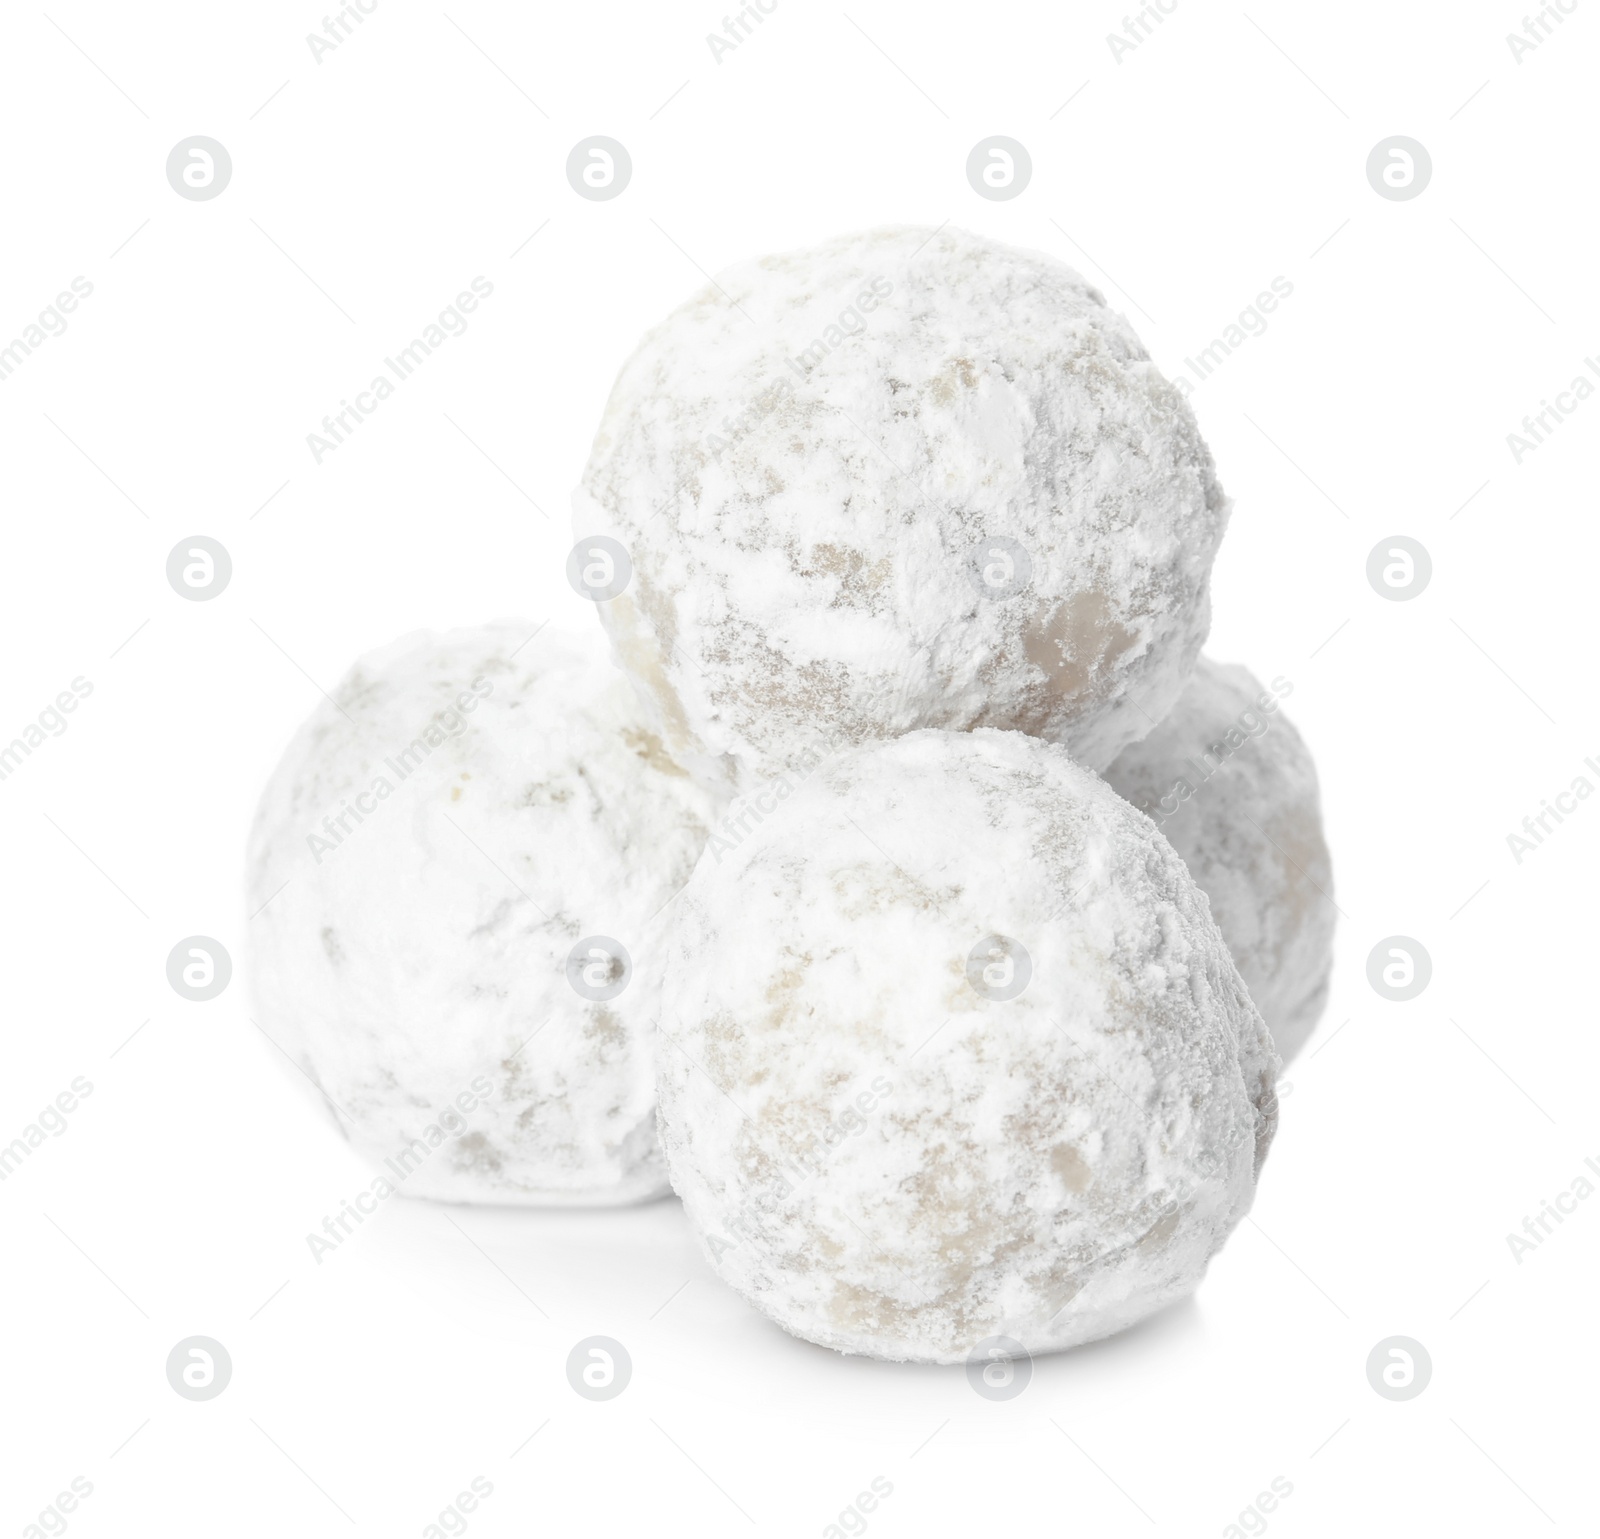 Photo of Pile of Christmas snowball cookies on white background